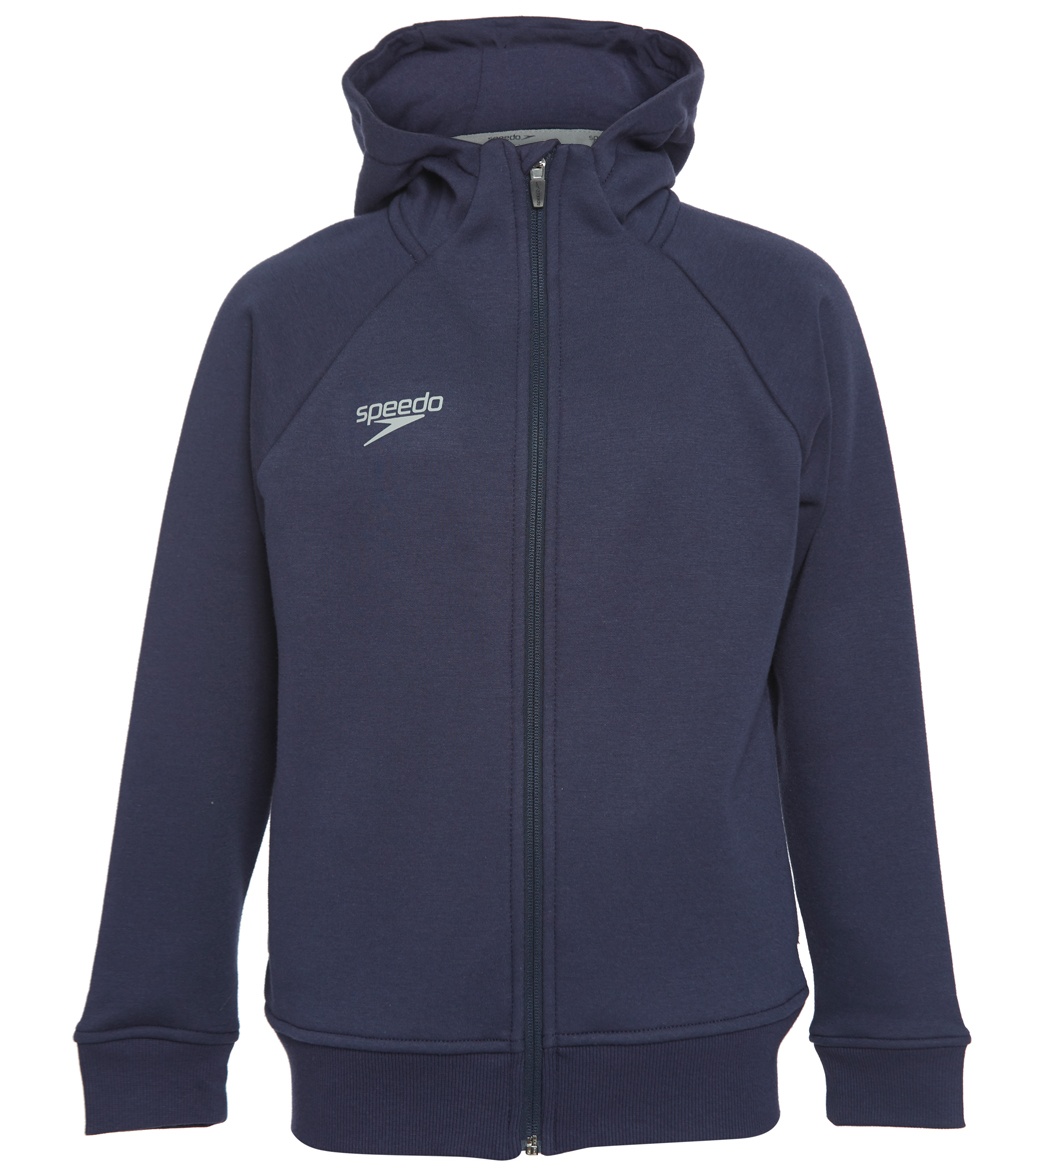 Speedo Youth Team Jacket - Navy Large Size Large Cotton/Polyester - Swimoutlet.com